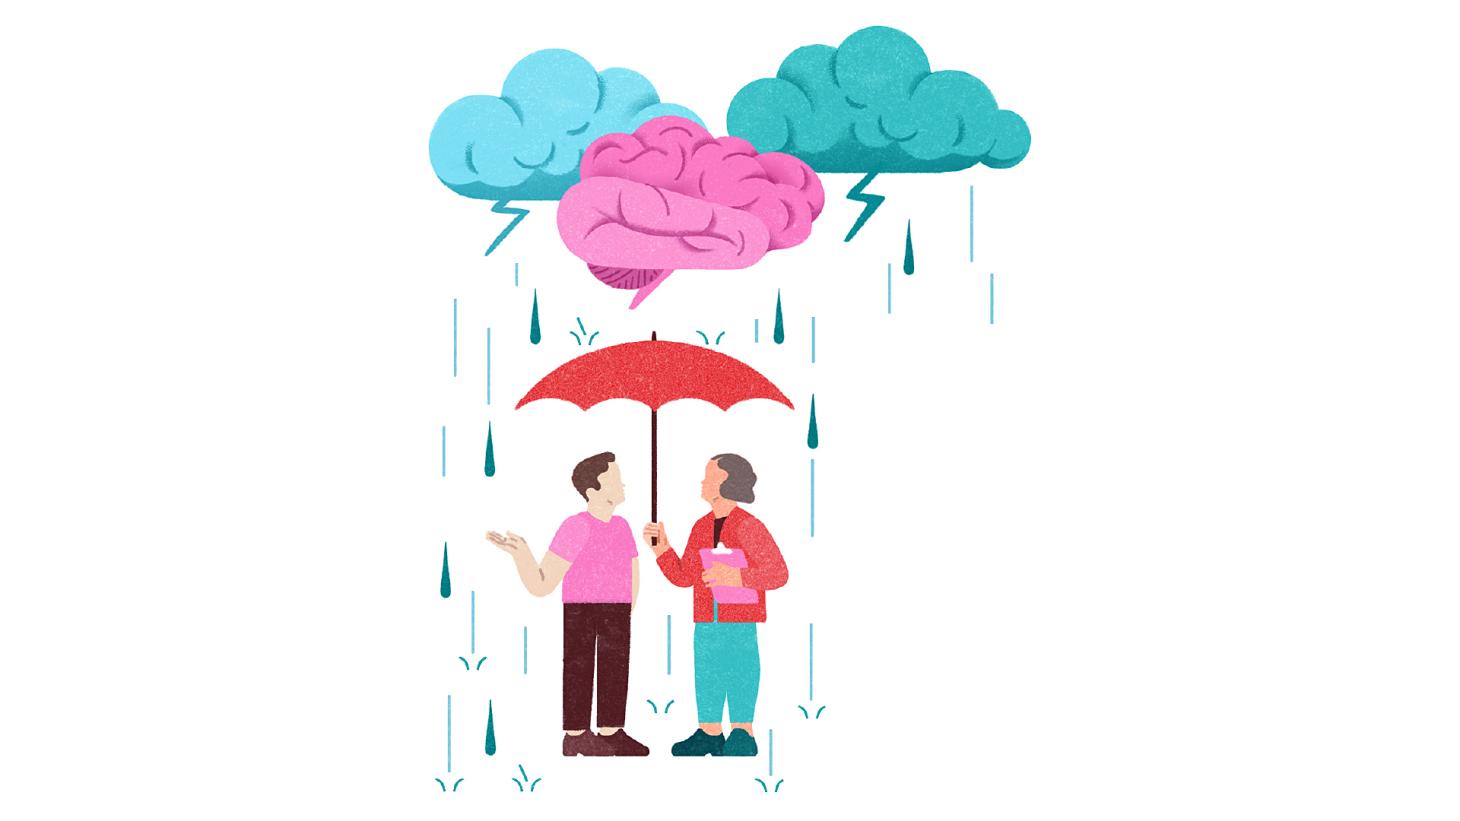 Illustration of brains depicted as clouds causing a storm, raining down on two people who are standing under an umbrella 